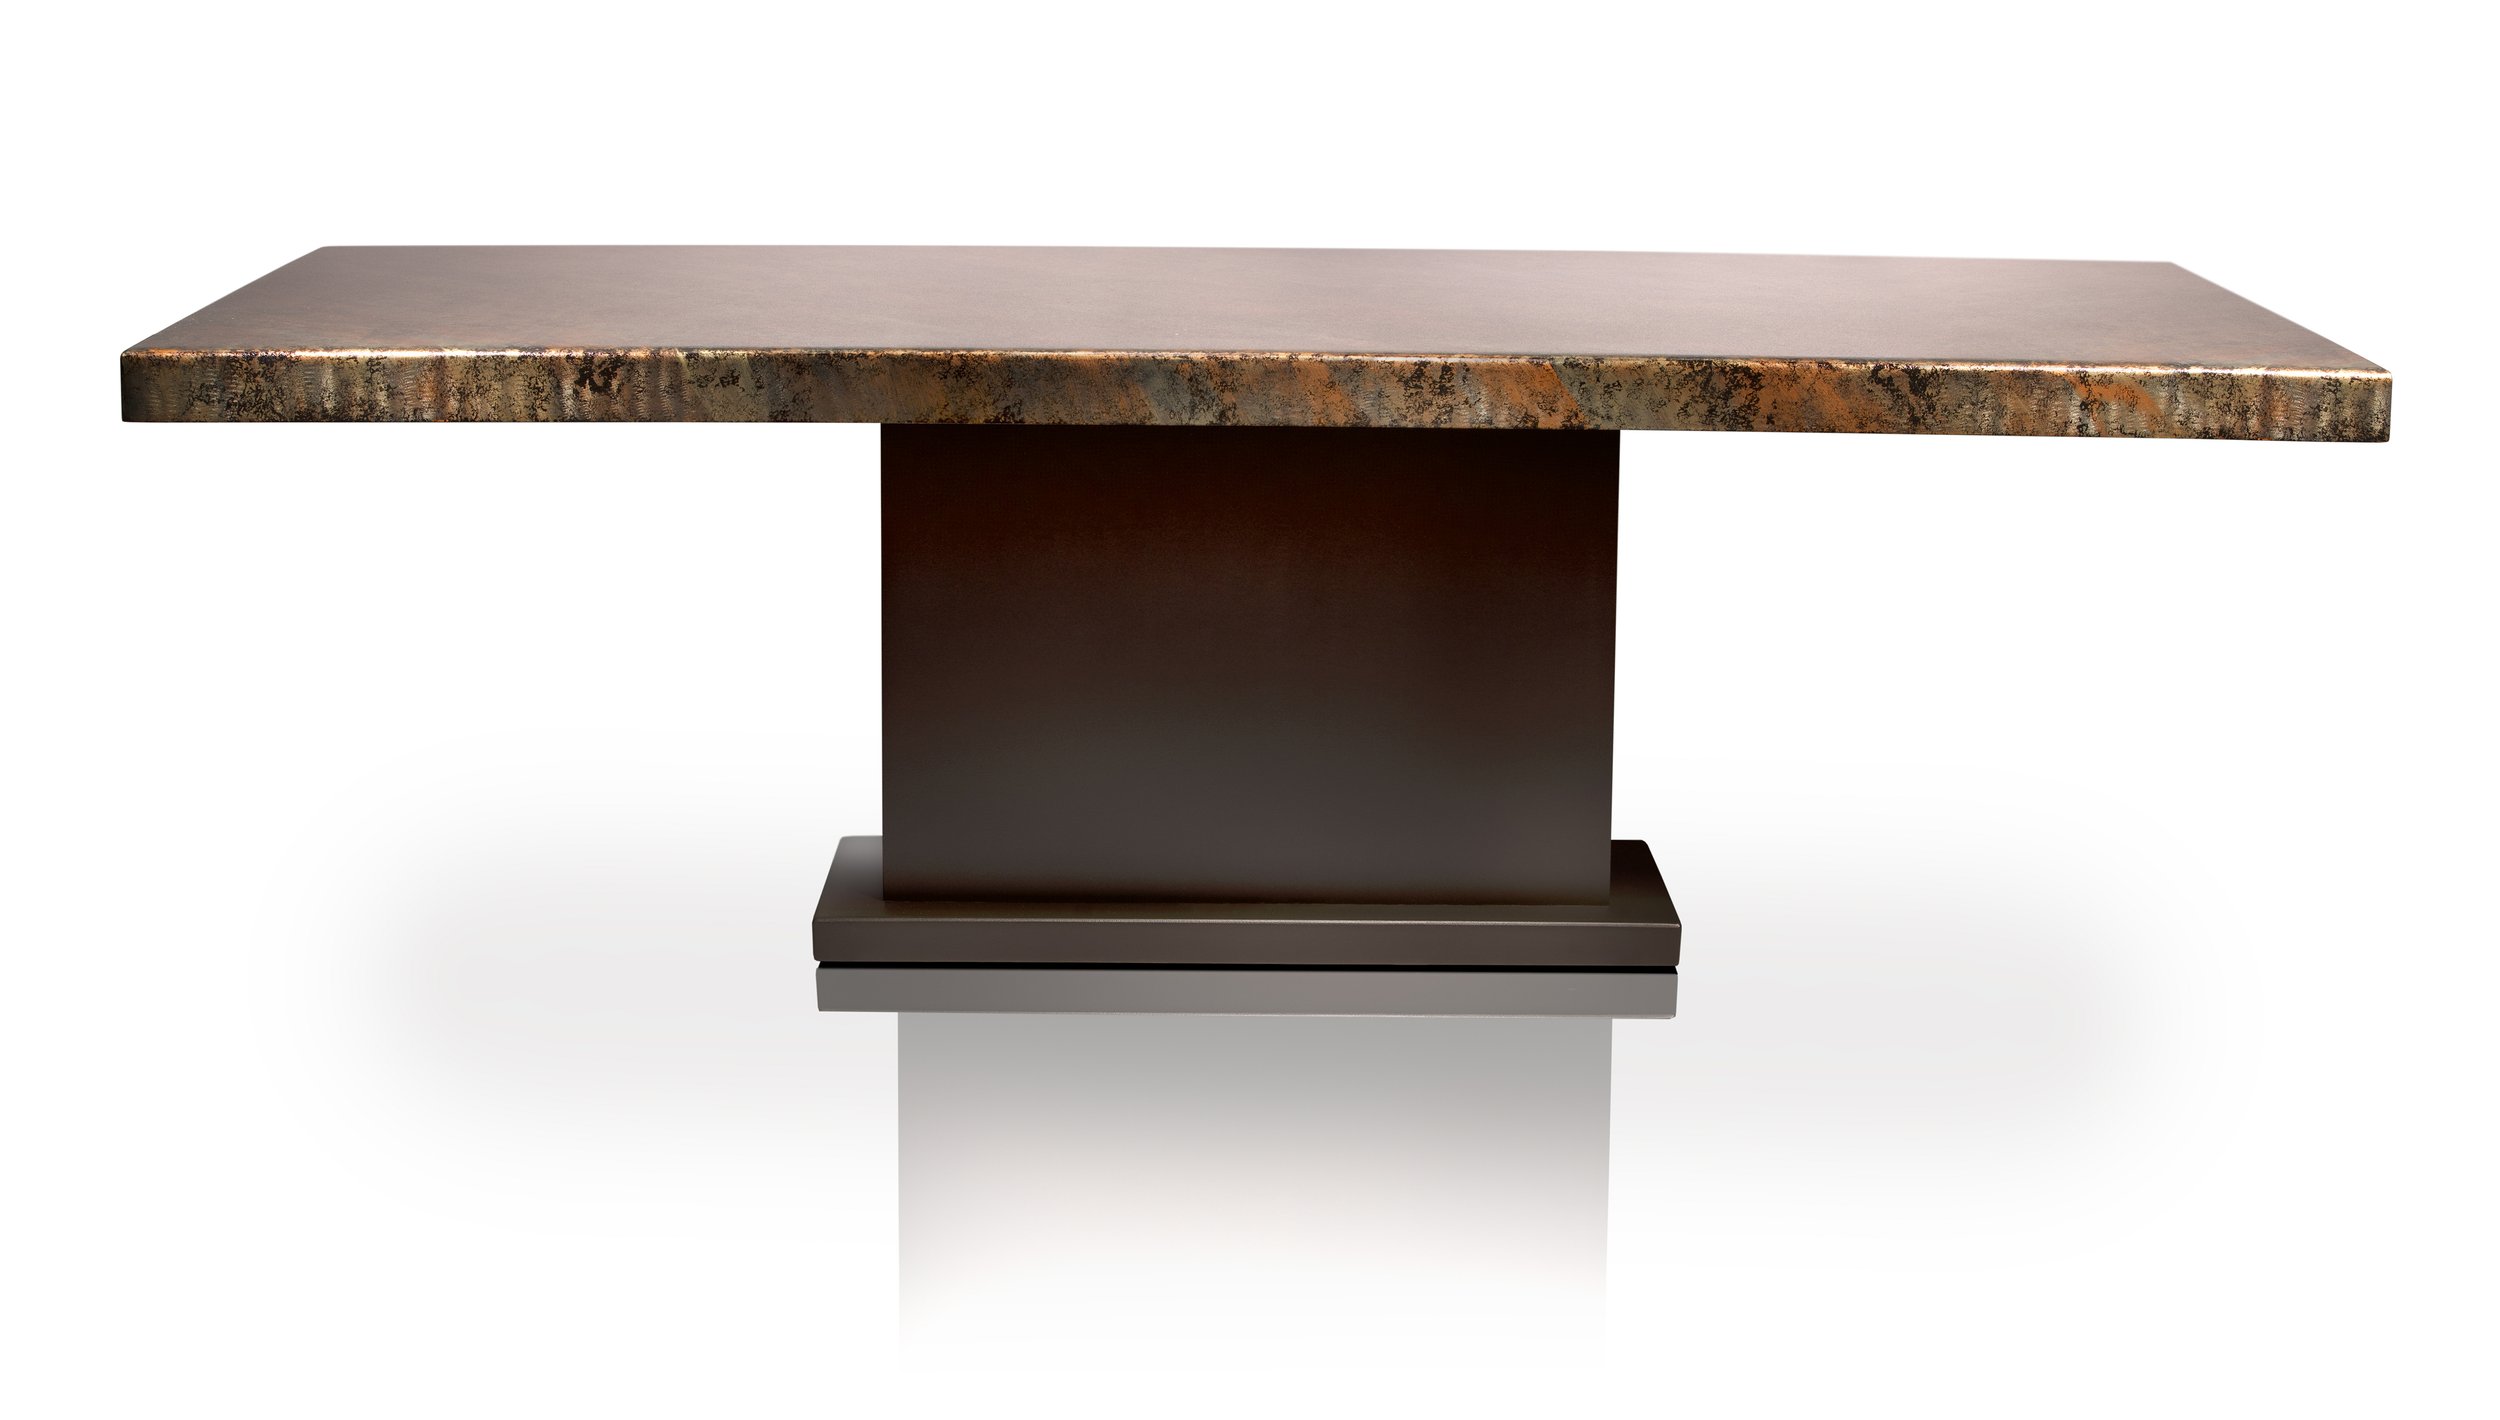 Metall Furniture_Dining Table-Rec_Hillstone-1_PIC-1 copy.jpg